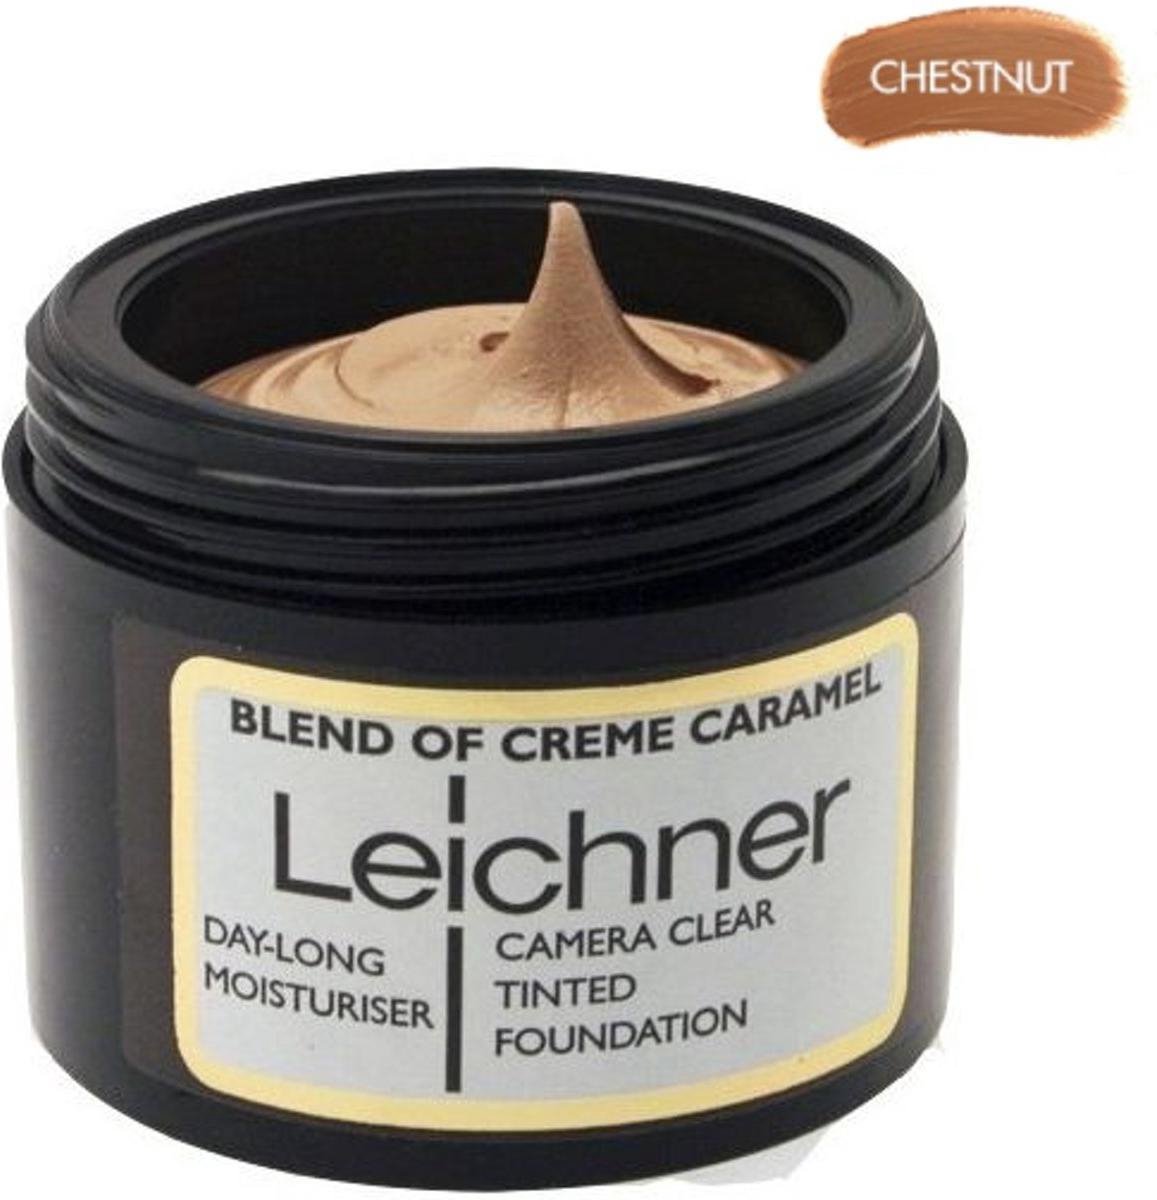 Leichner Camera Clear Tinted Foundation 30ml Blend Of Chestnut